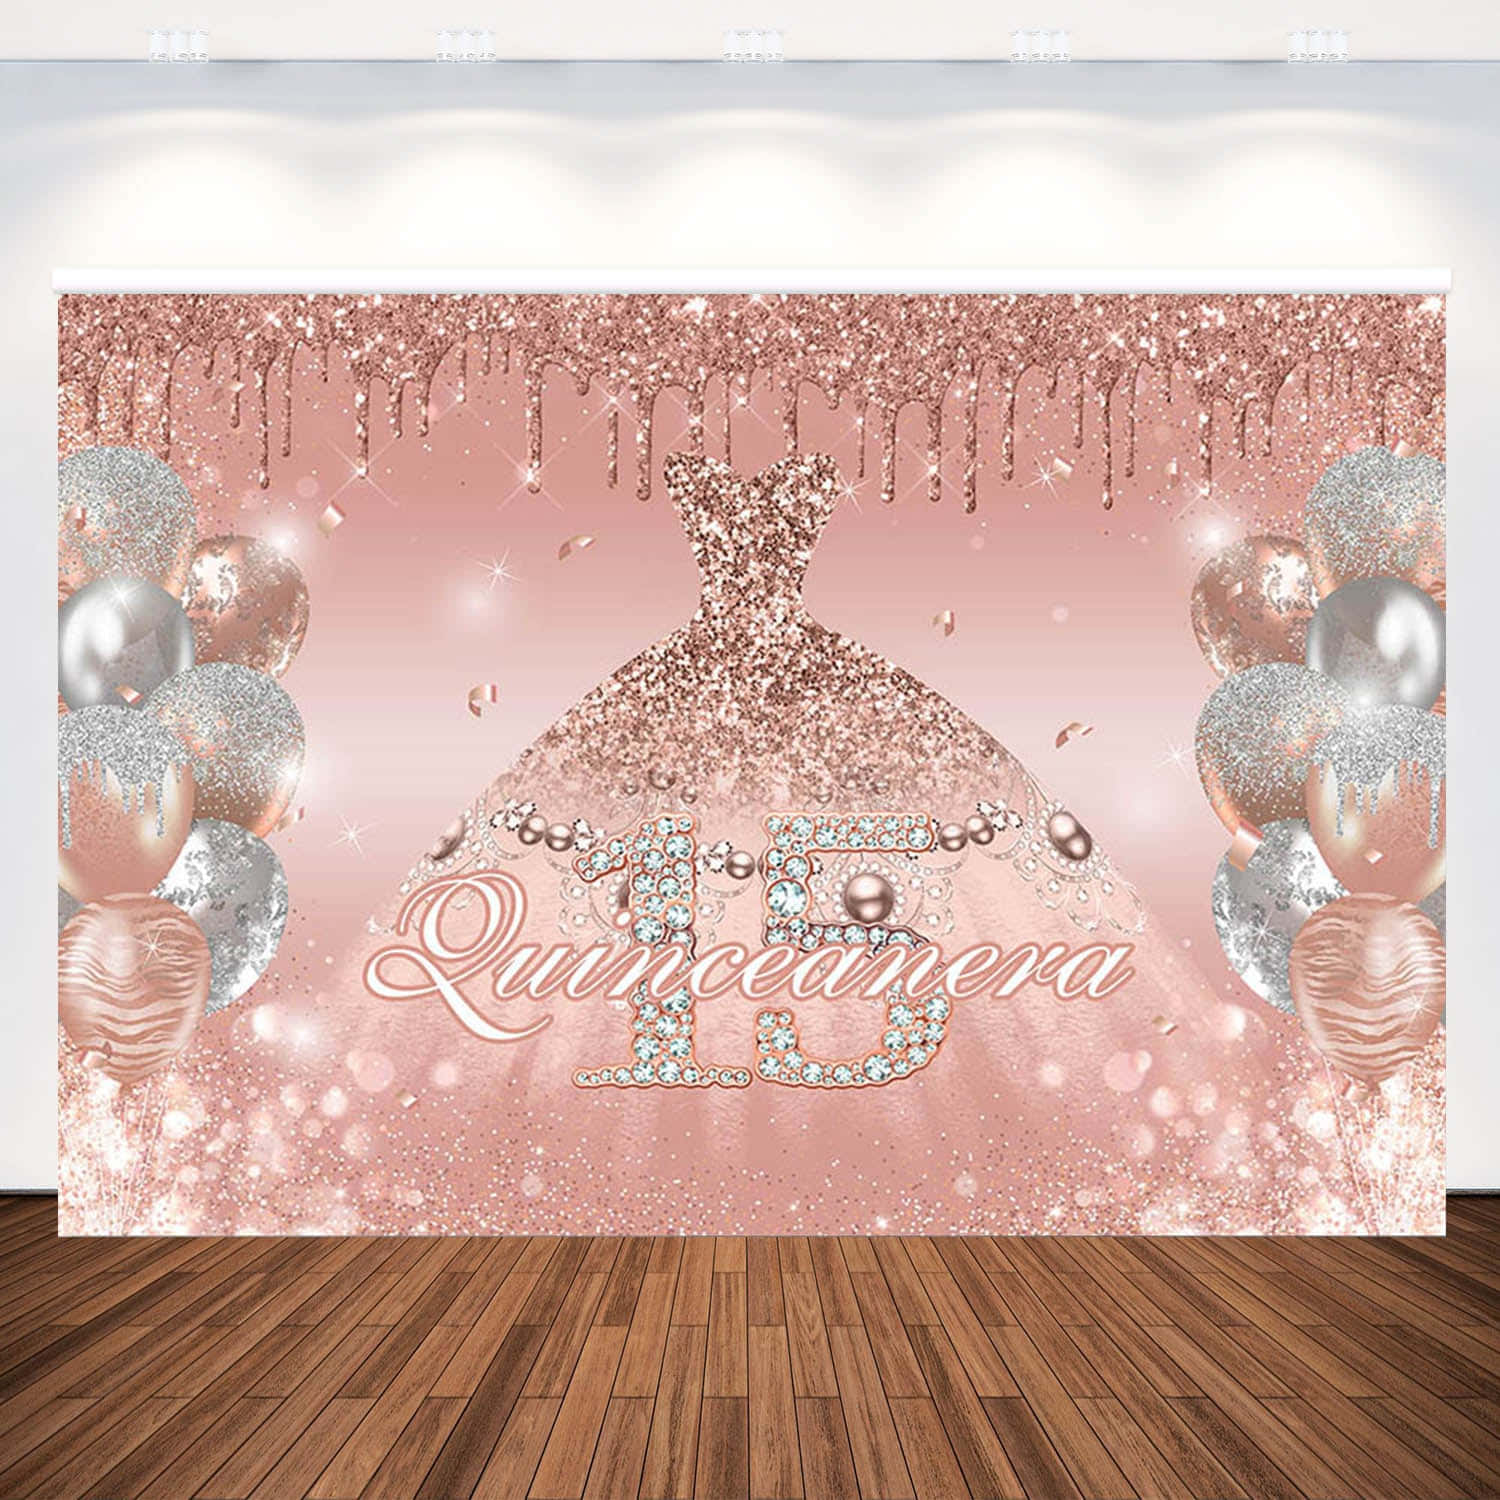 A Pink And Silver Quinceanera Party Backdrop With Balloons